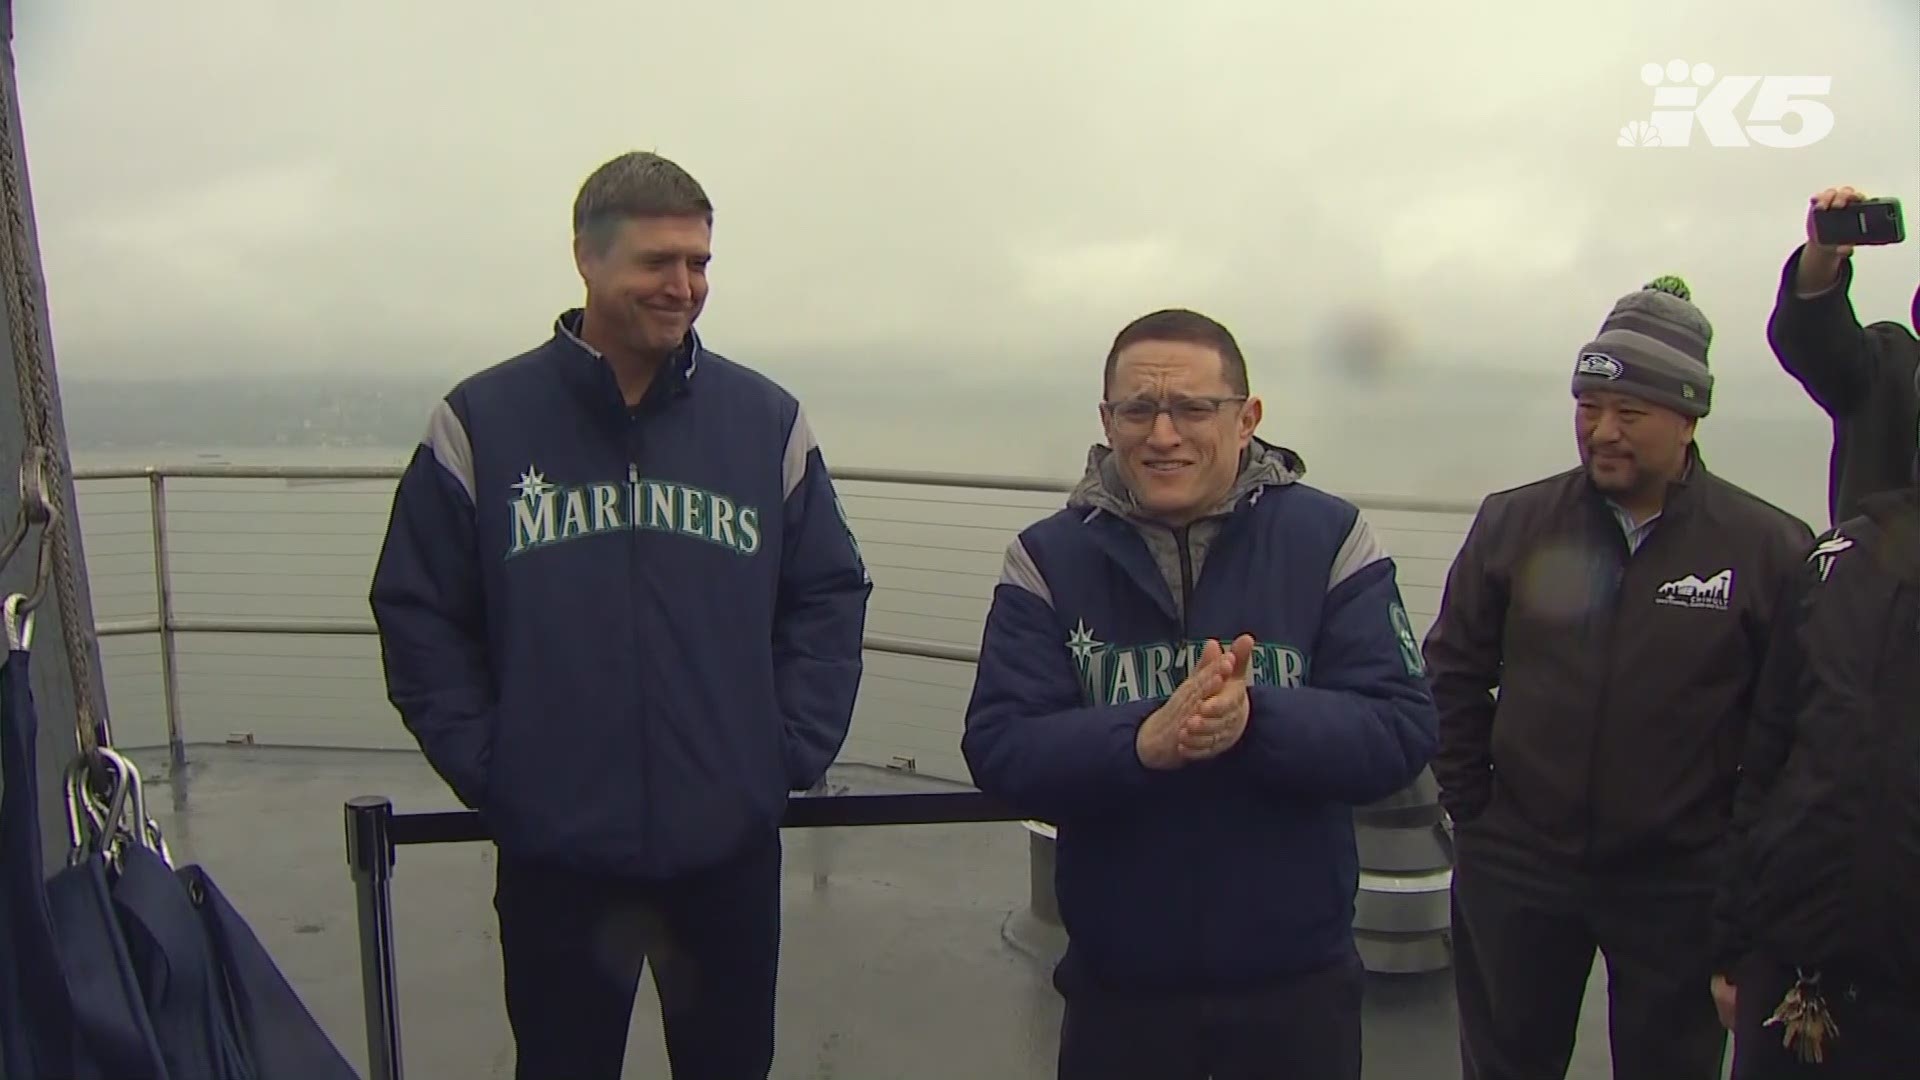 Dan Wilson, Edgar Martinez's former teammate, raises the 11 flag on the Space Needle after Martinez made it into the Baseball Hall of Fame.